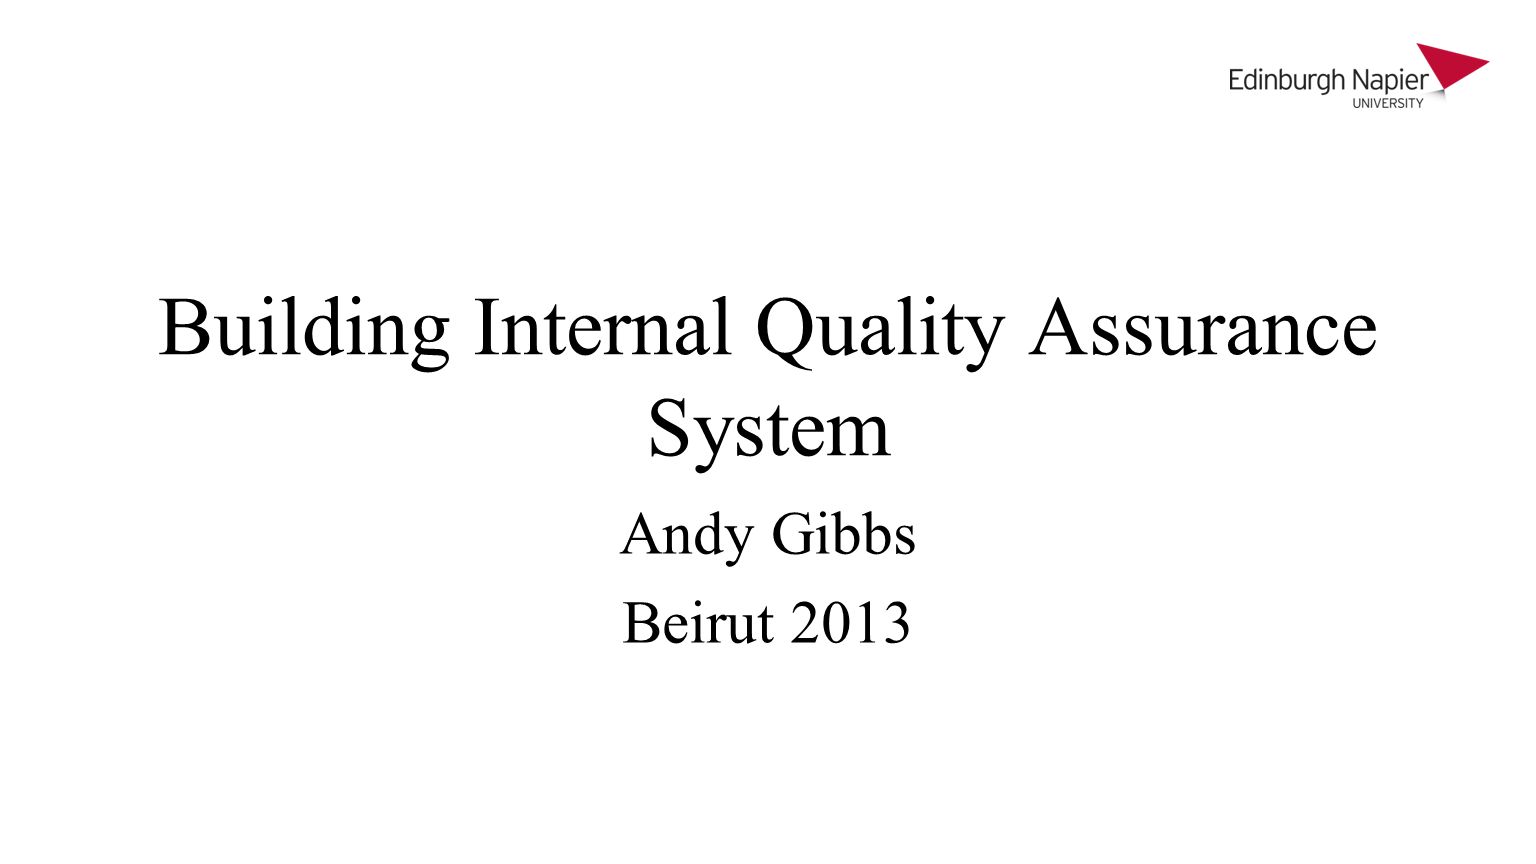 Building Internal Quality Assurance System Andy Gibbs Beirut 2013